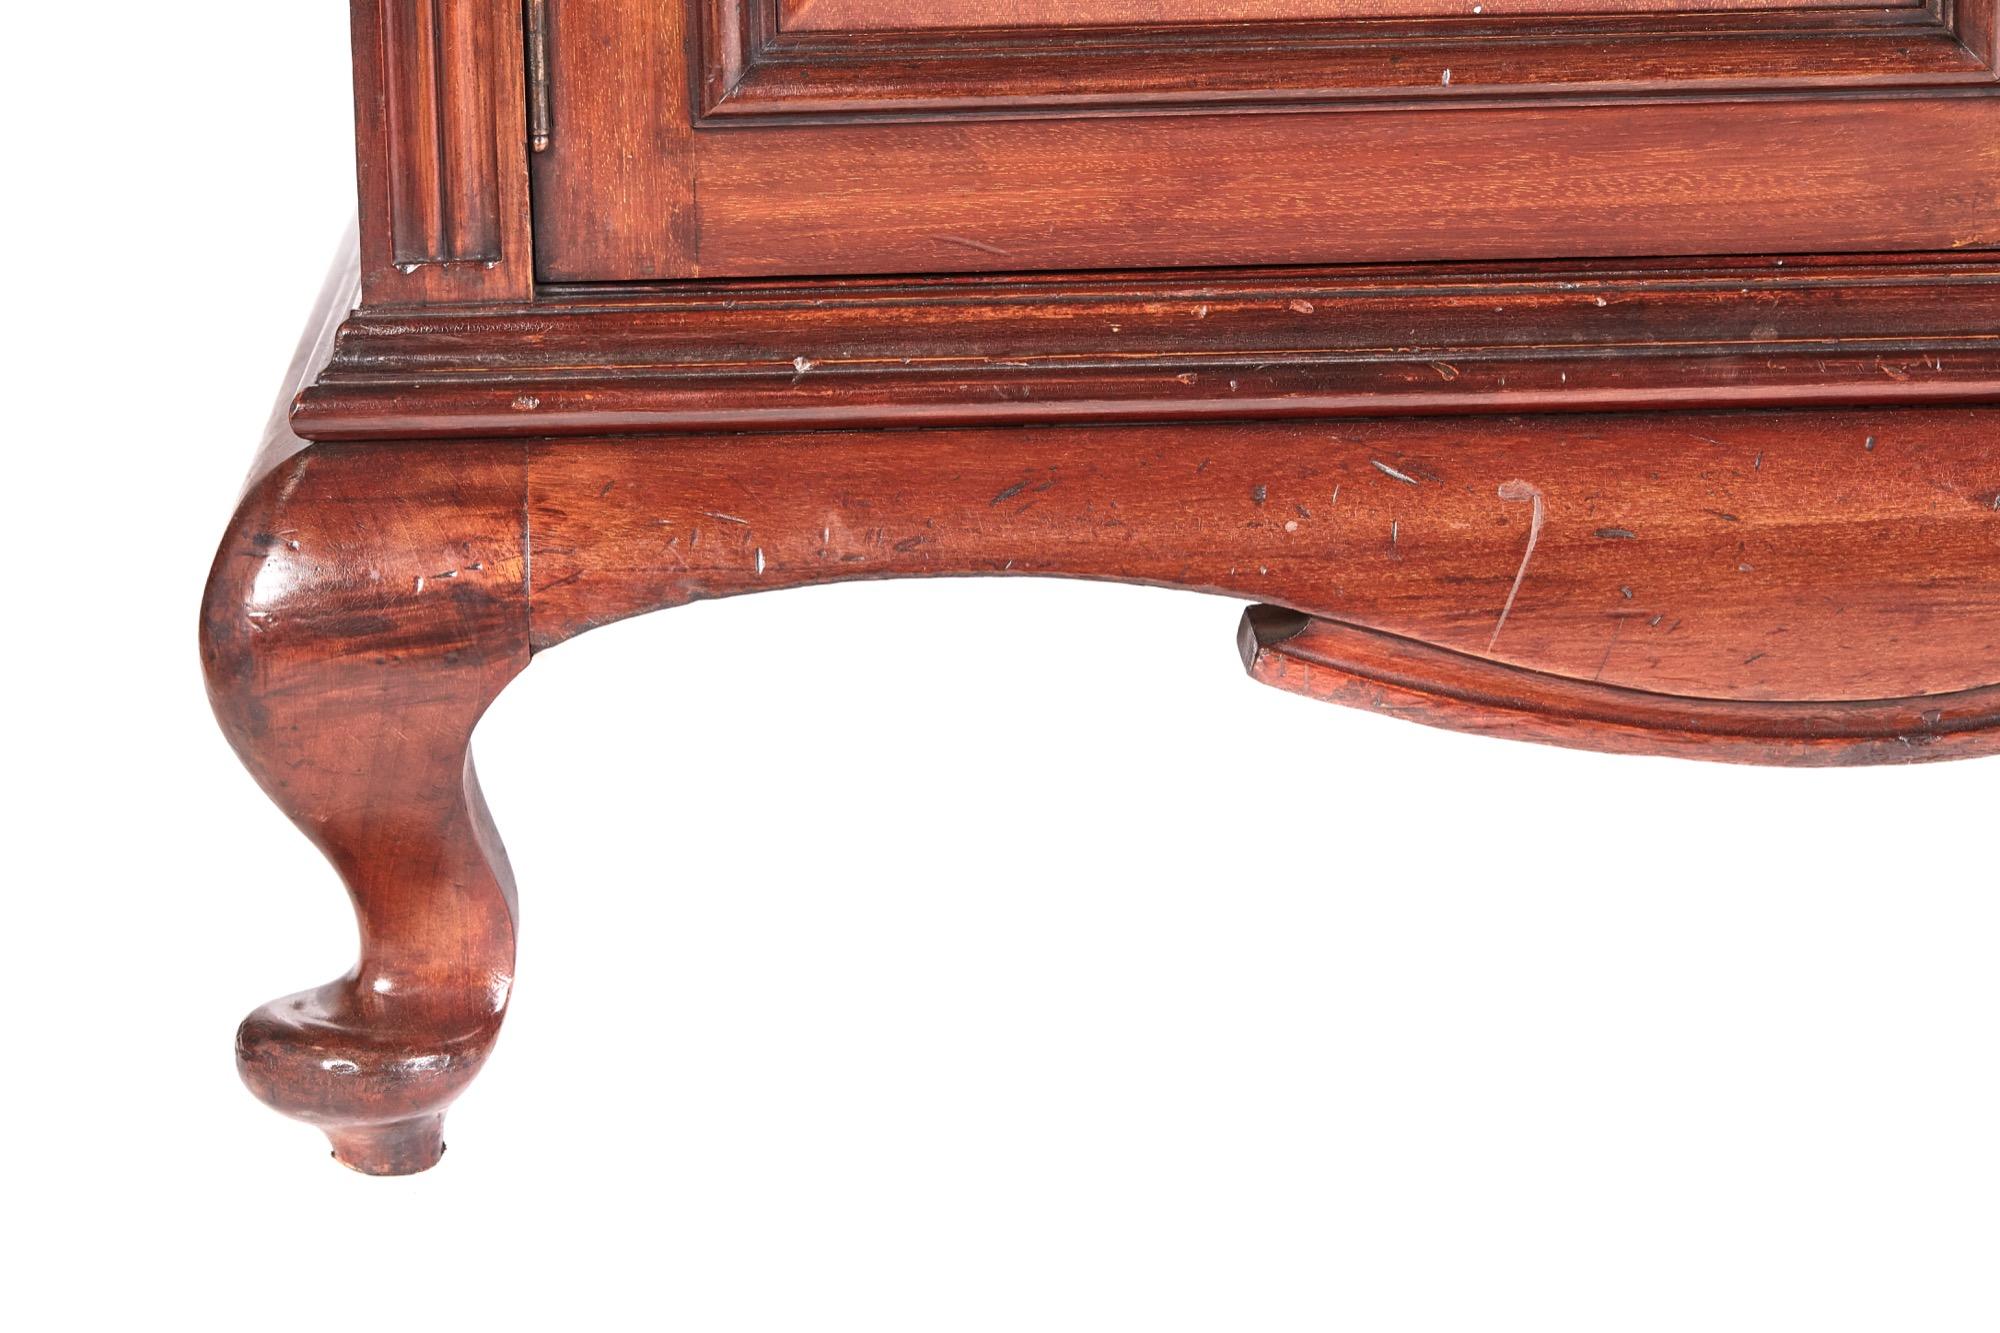 Large Antique Carved Mahogany Sideboard by Maple & Co. For Sale 9